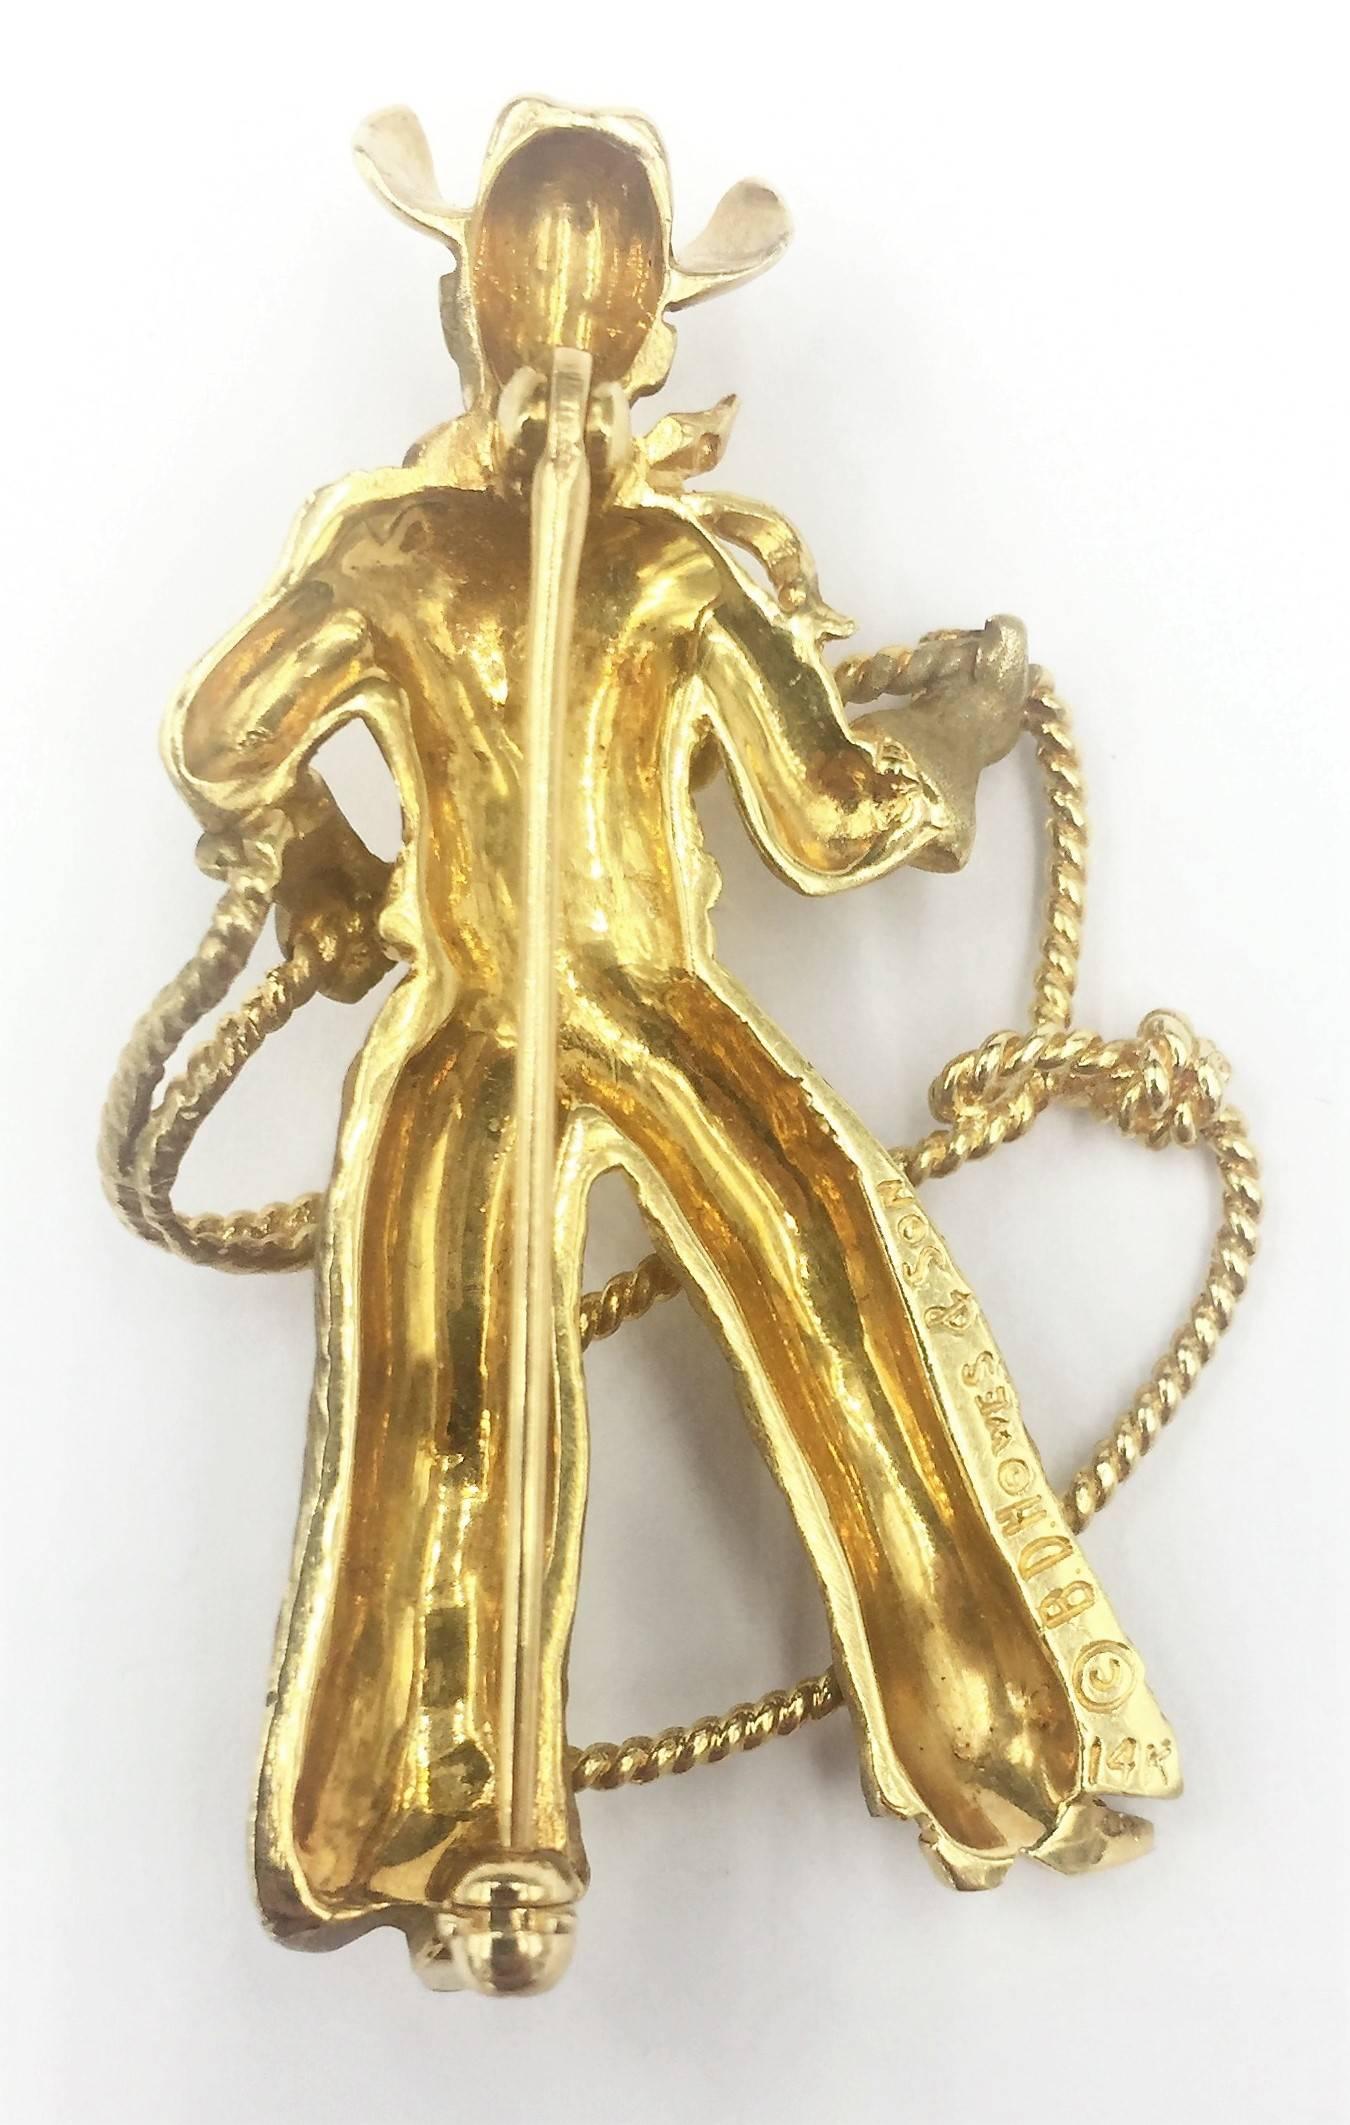 Contemporary Captivating B.D. Howes and Son Gold Cowboy Rodeo Man Pin Brooch